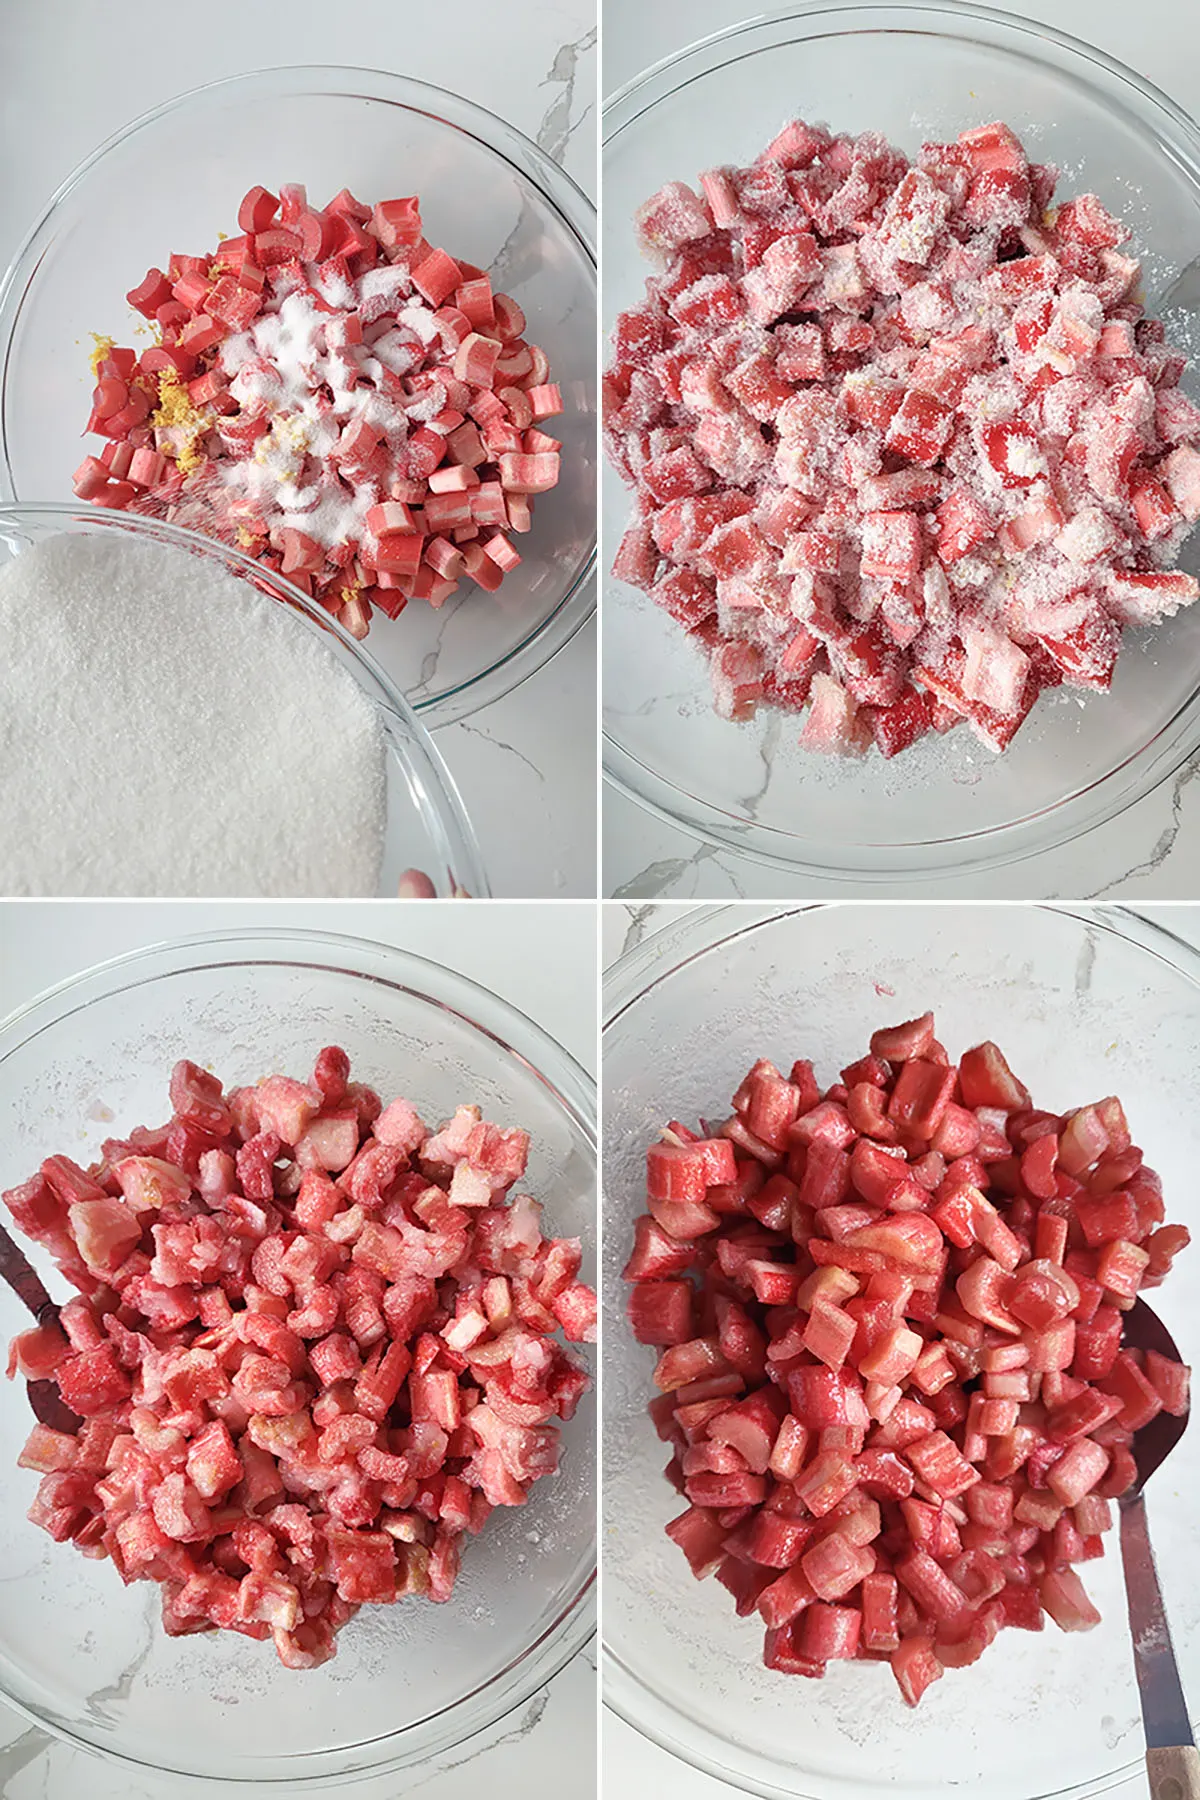 Rhubarb and sugar in a bowl changing  over 1 hour.